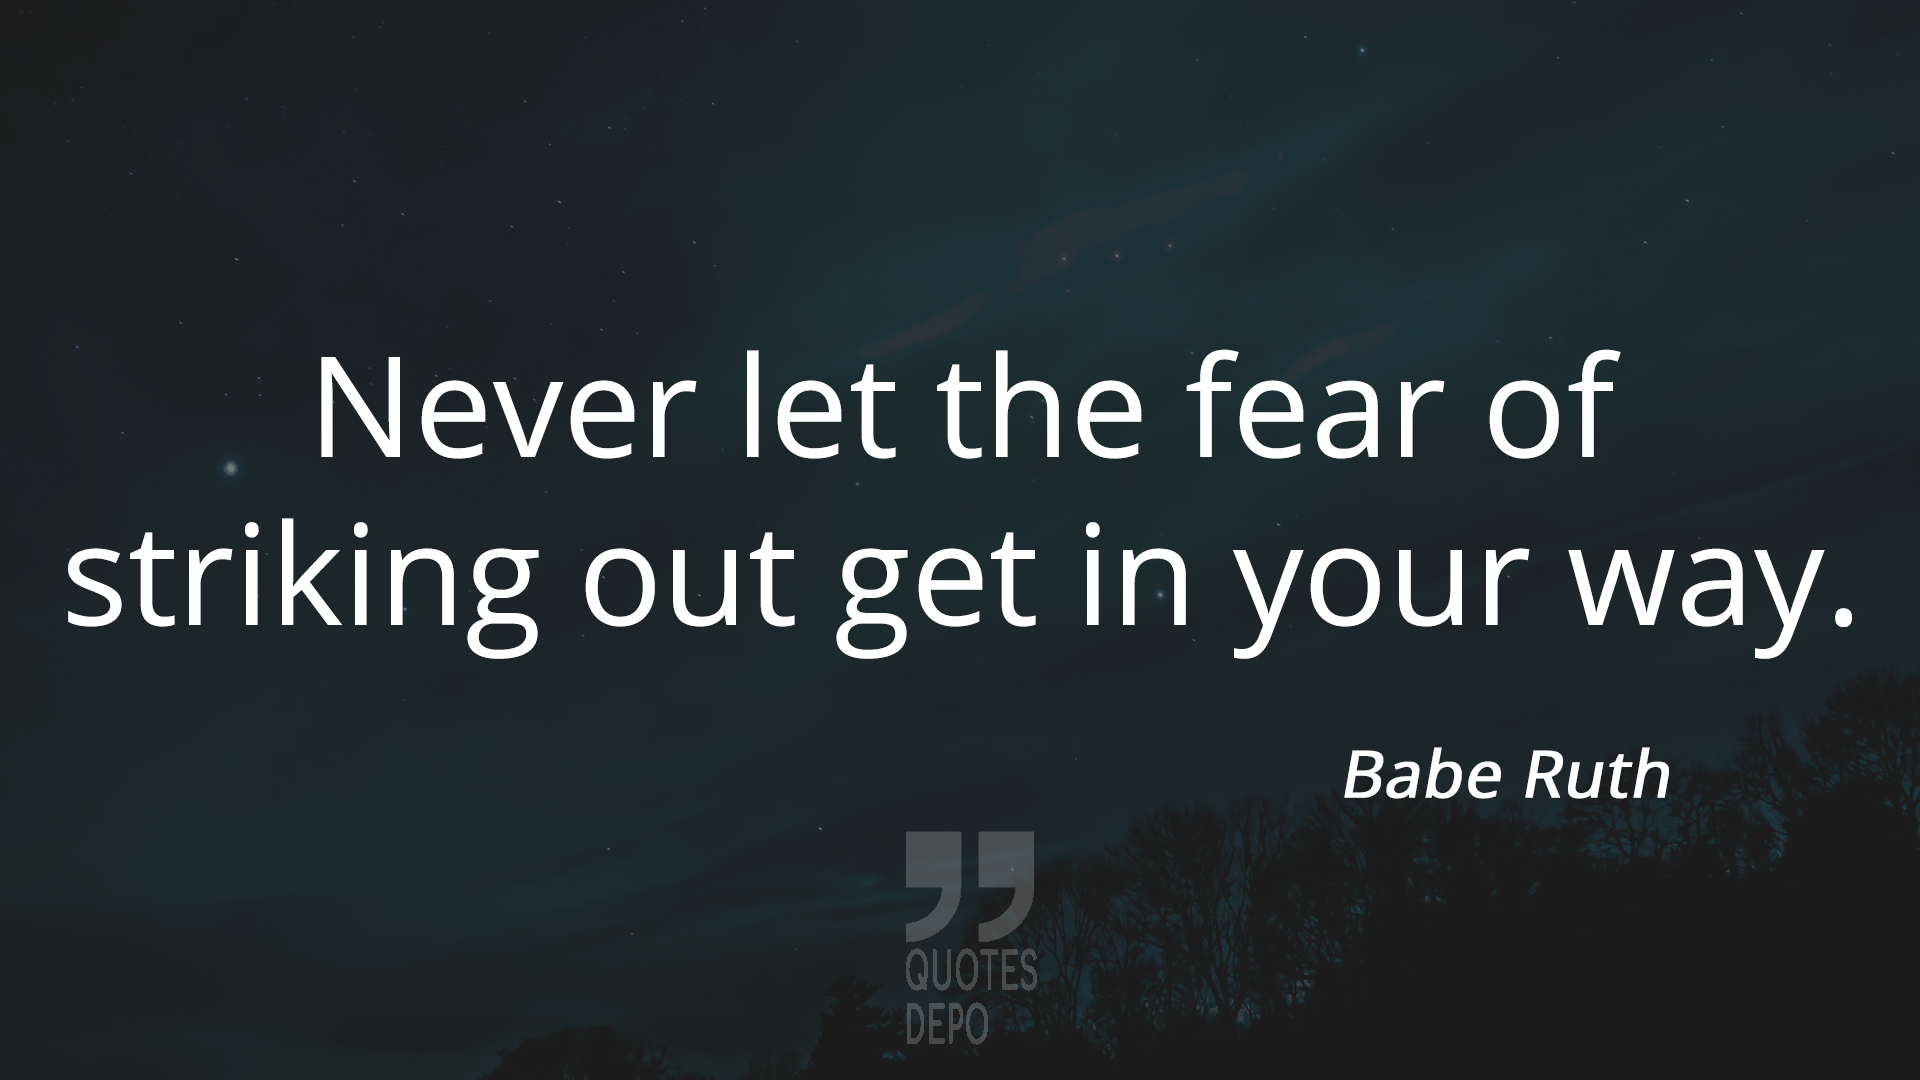 babe-ruth-quote-1-min